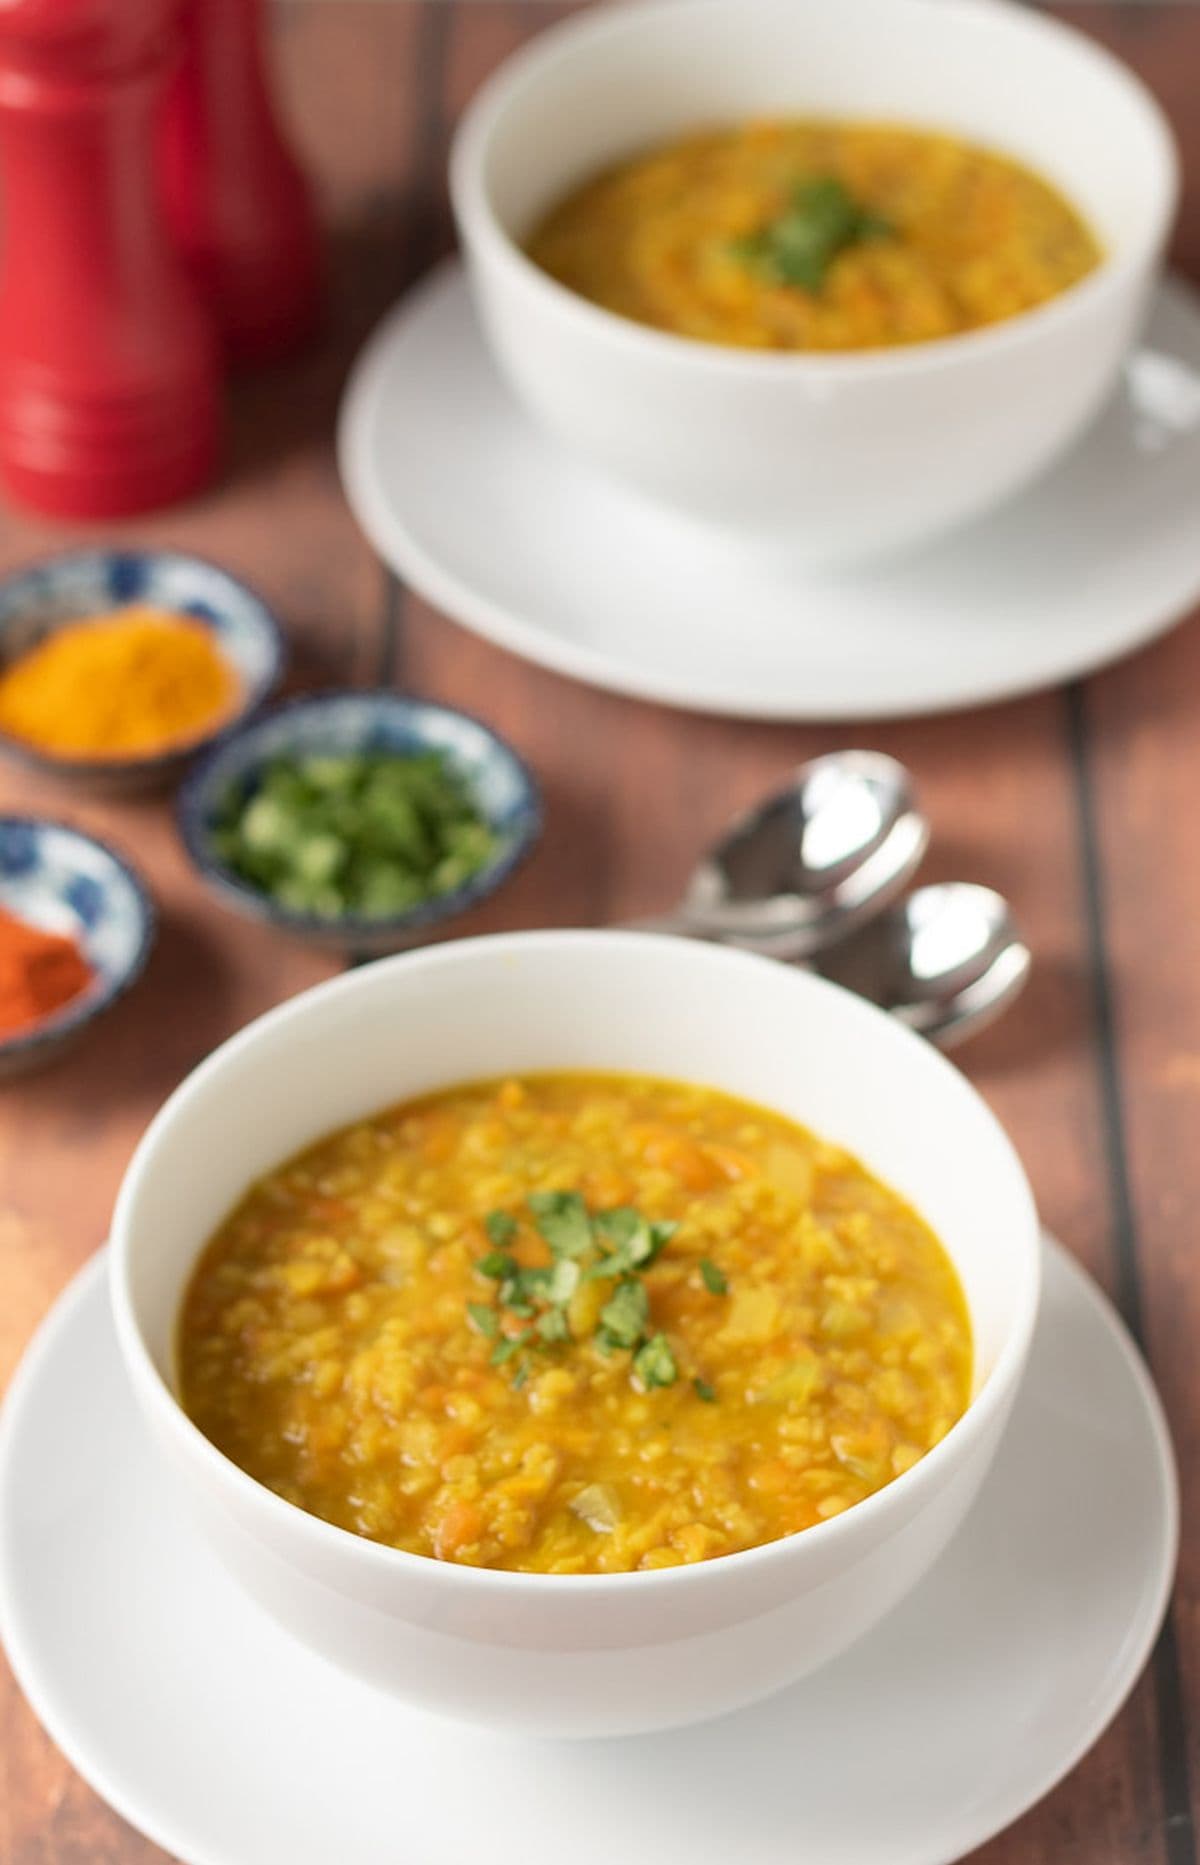 Two delicious bowls of curried red lentil soup with a selection of spices in seperate bowls in between.